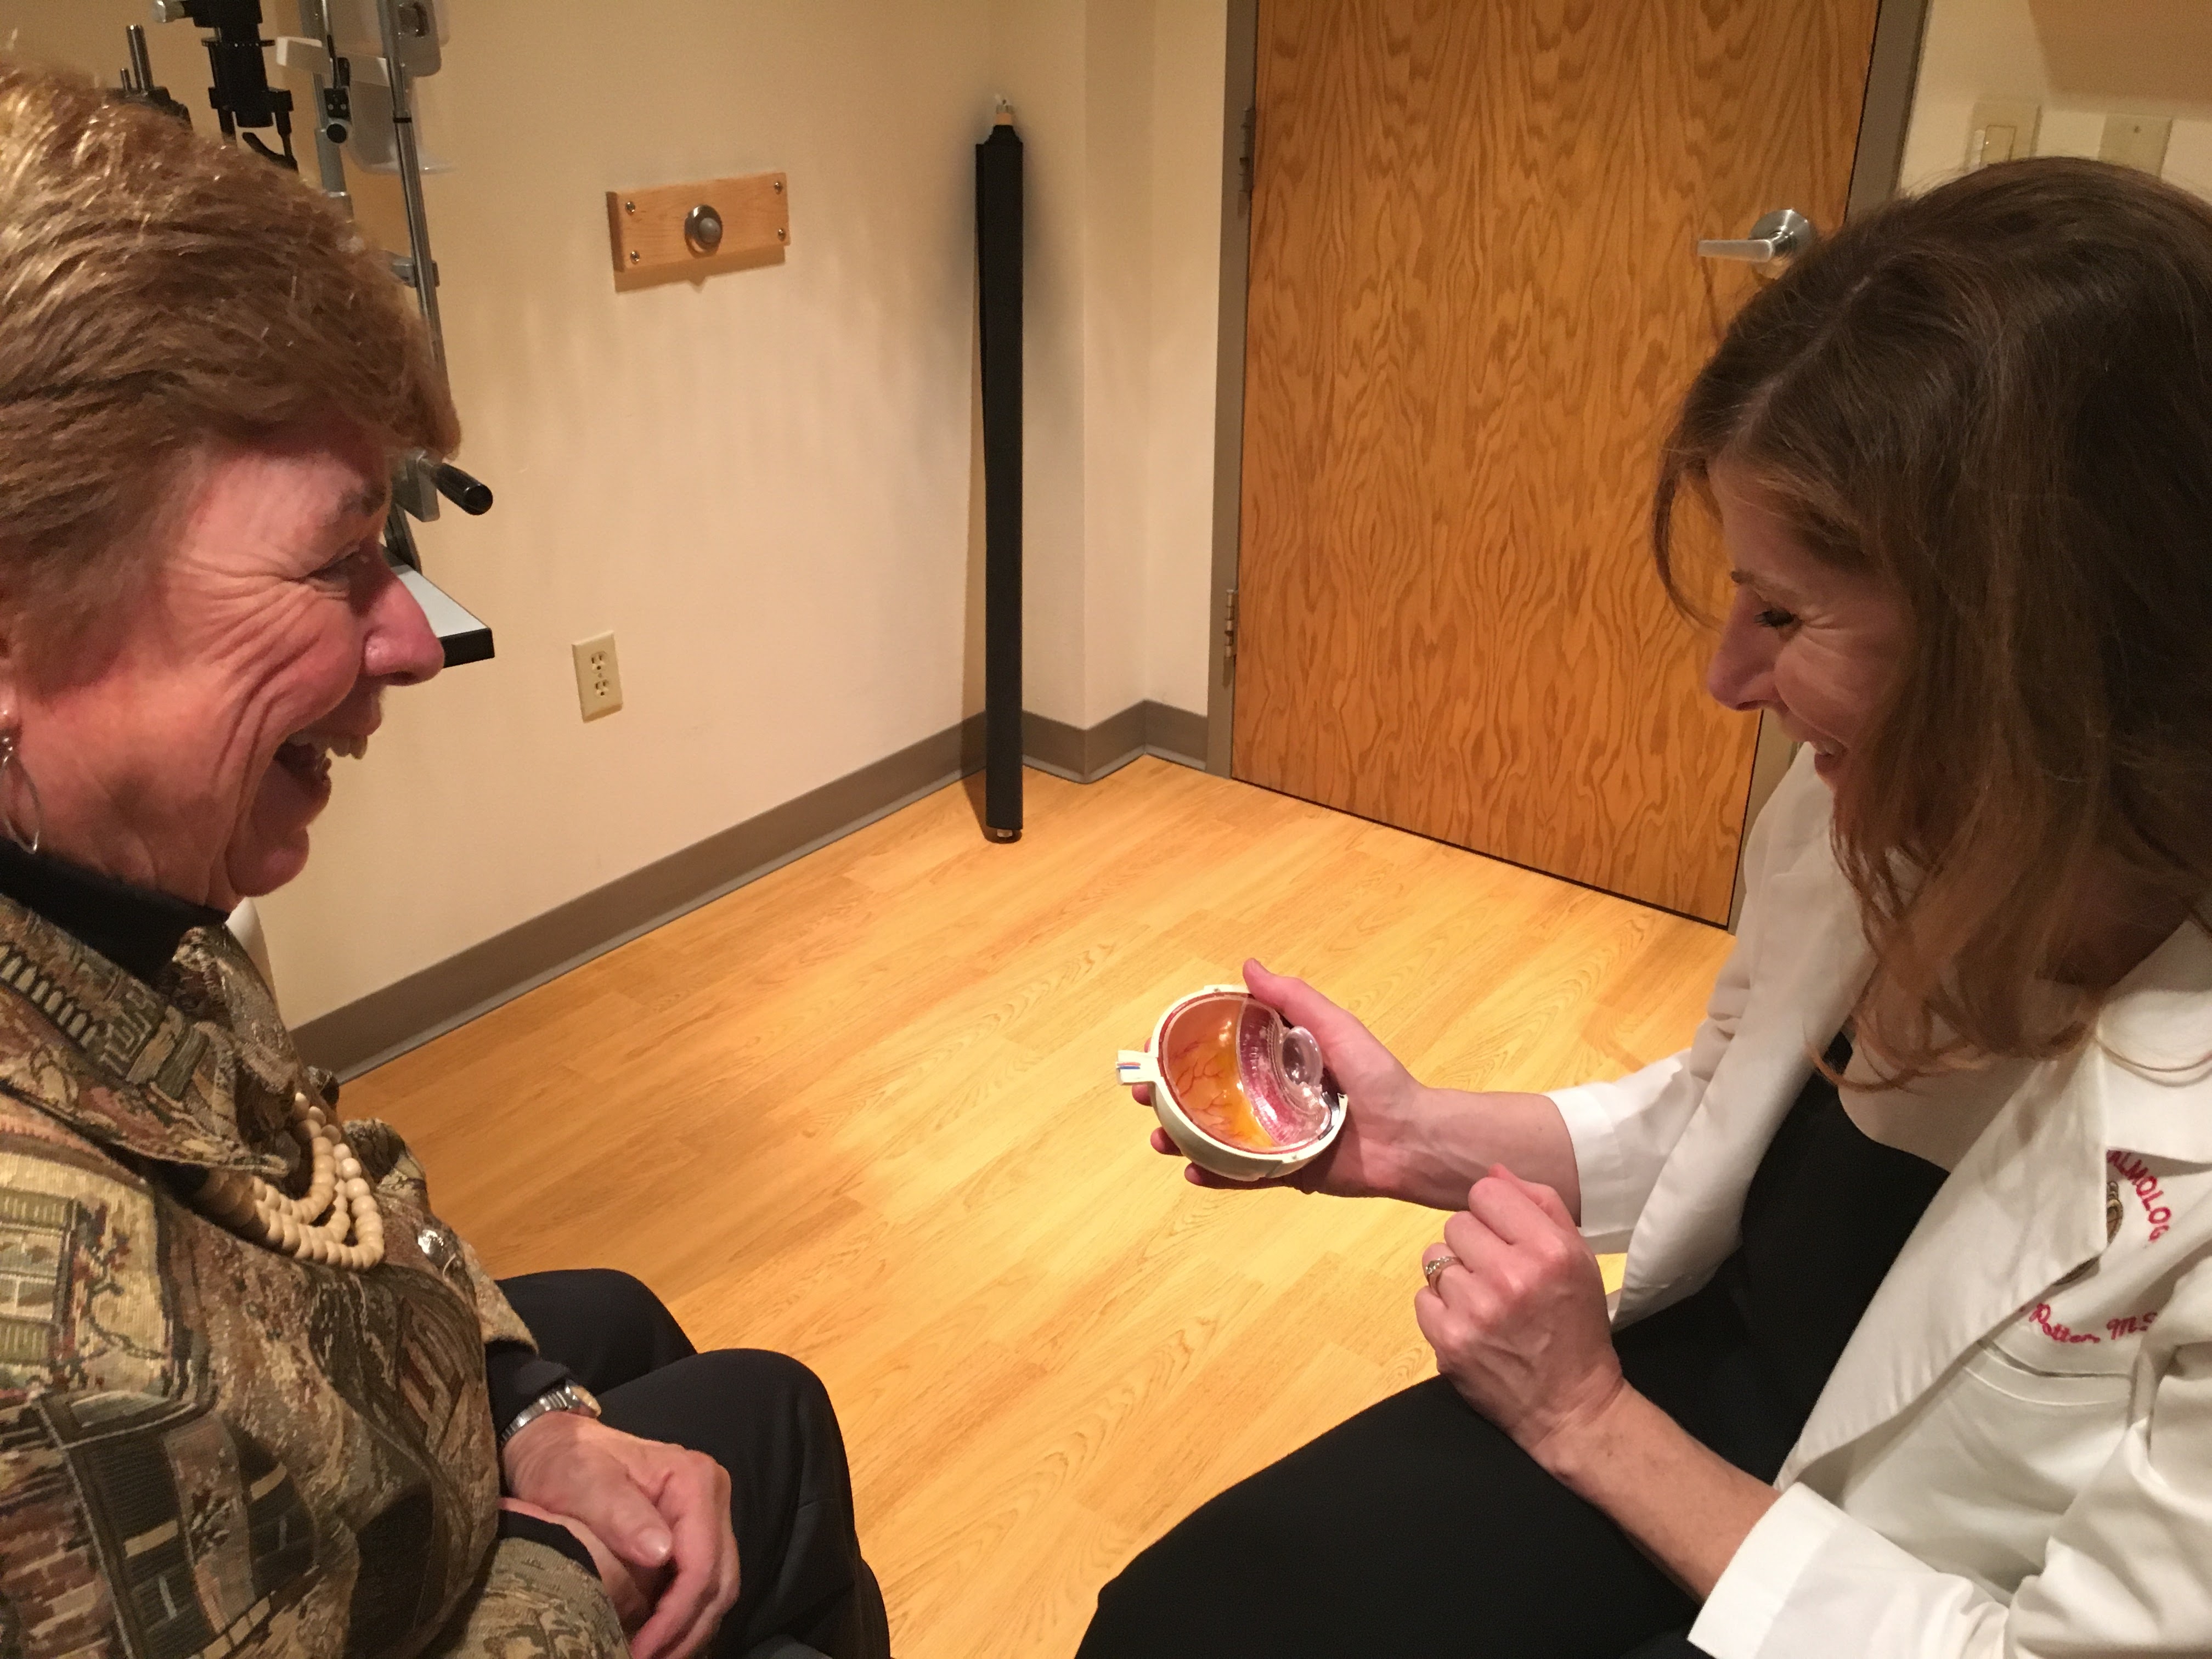 Ms. Jeffords and Dr. Potter discuss the cataracts and her new range of vision post-surgery.